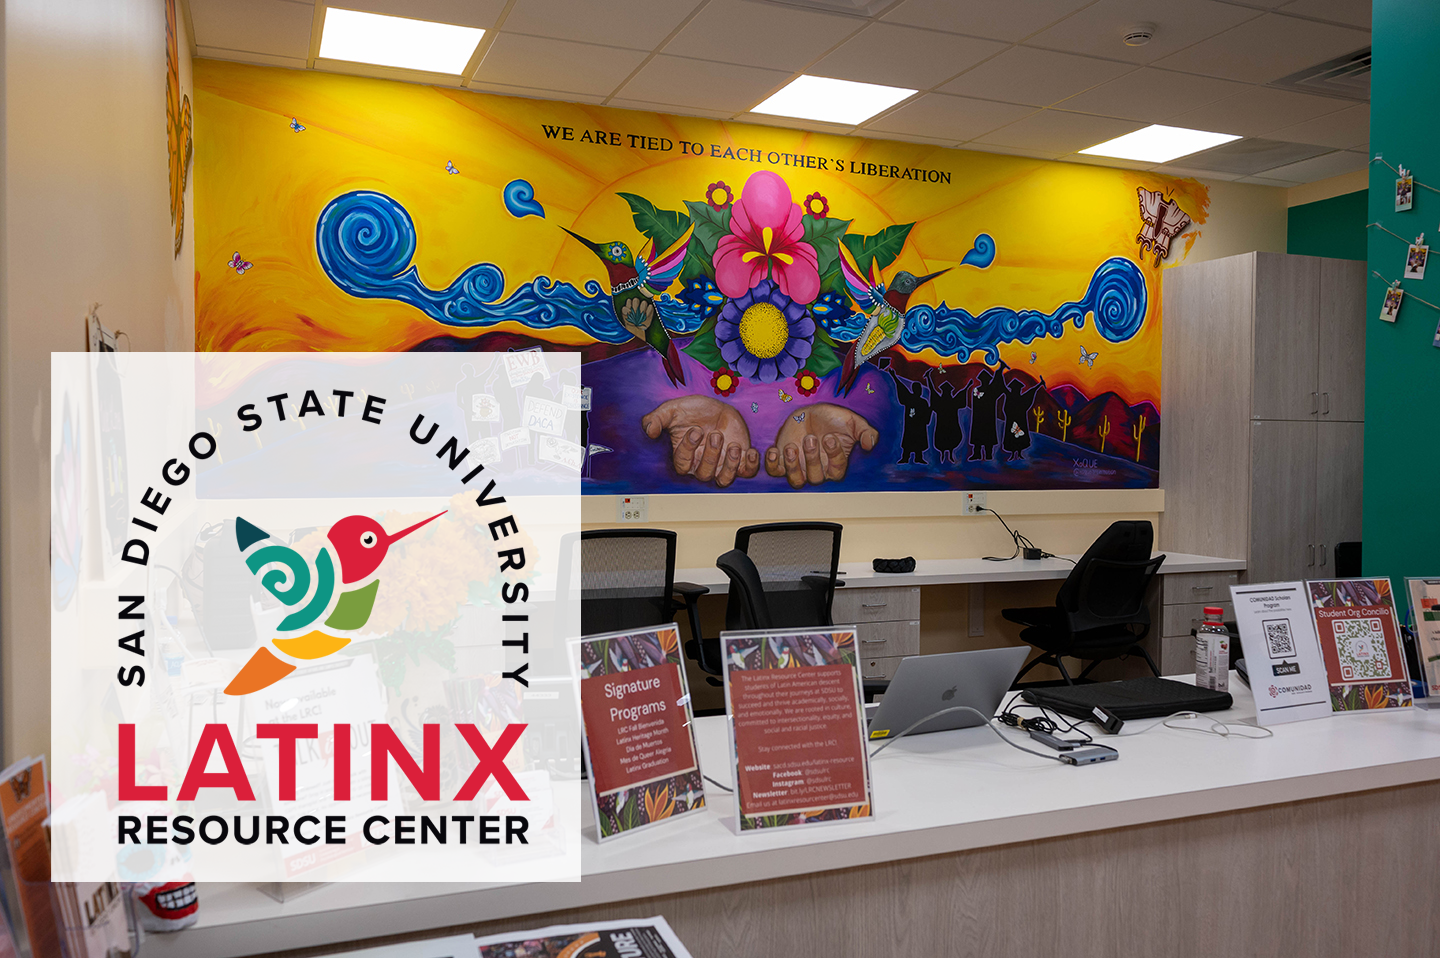 latinx resource center welcome desk with mural